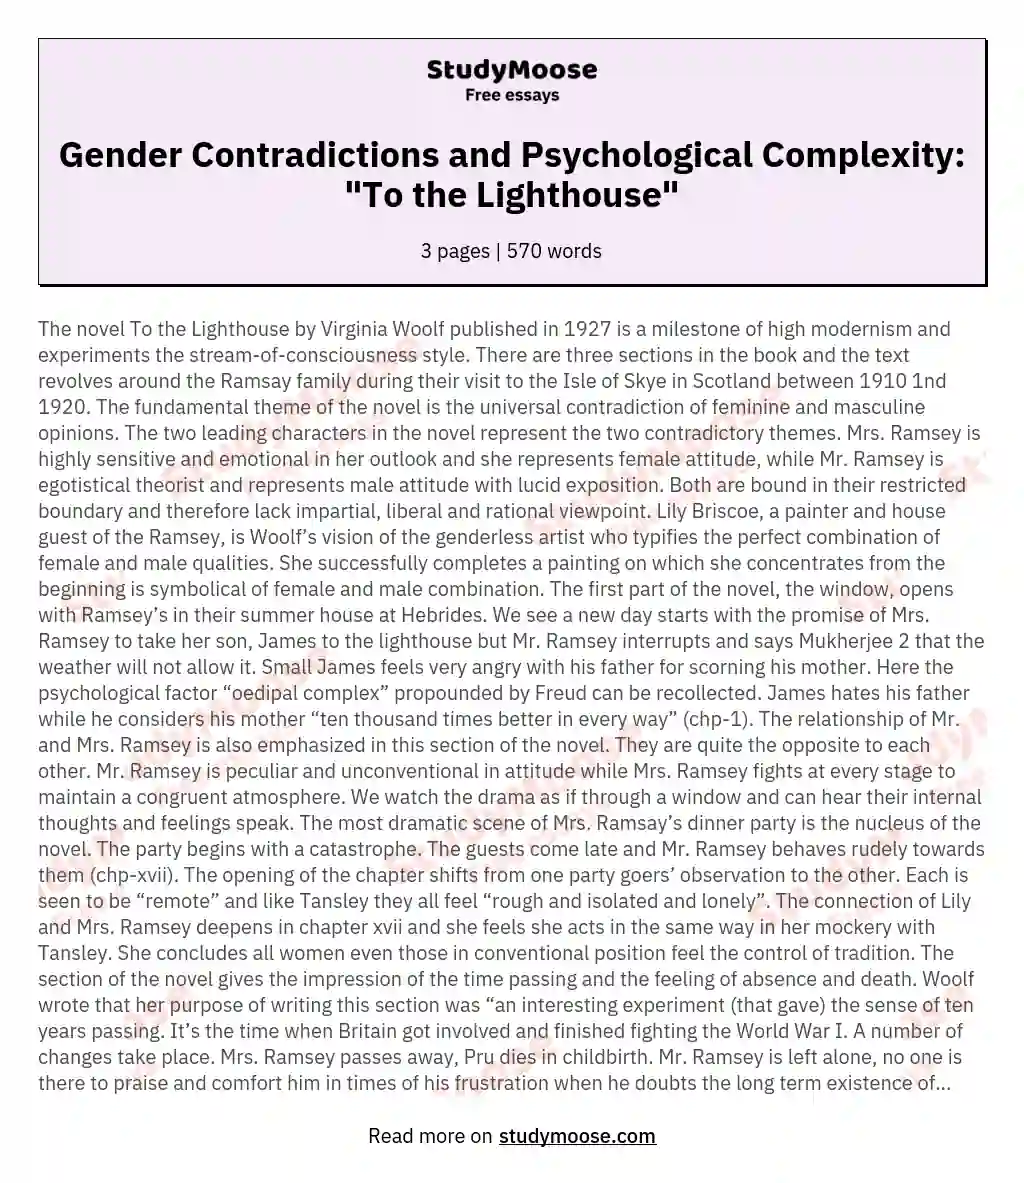 Gender Contradictions and Psychological Complexity: "To the Lighthouse" essay